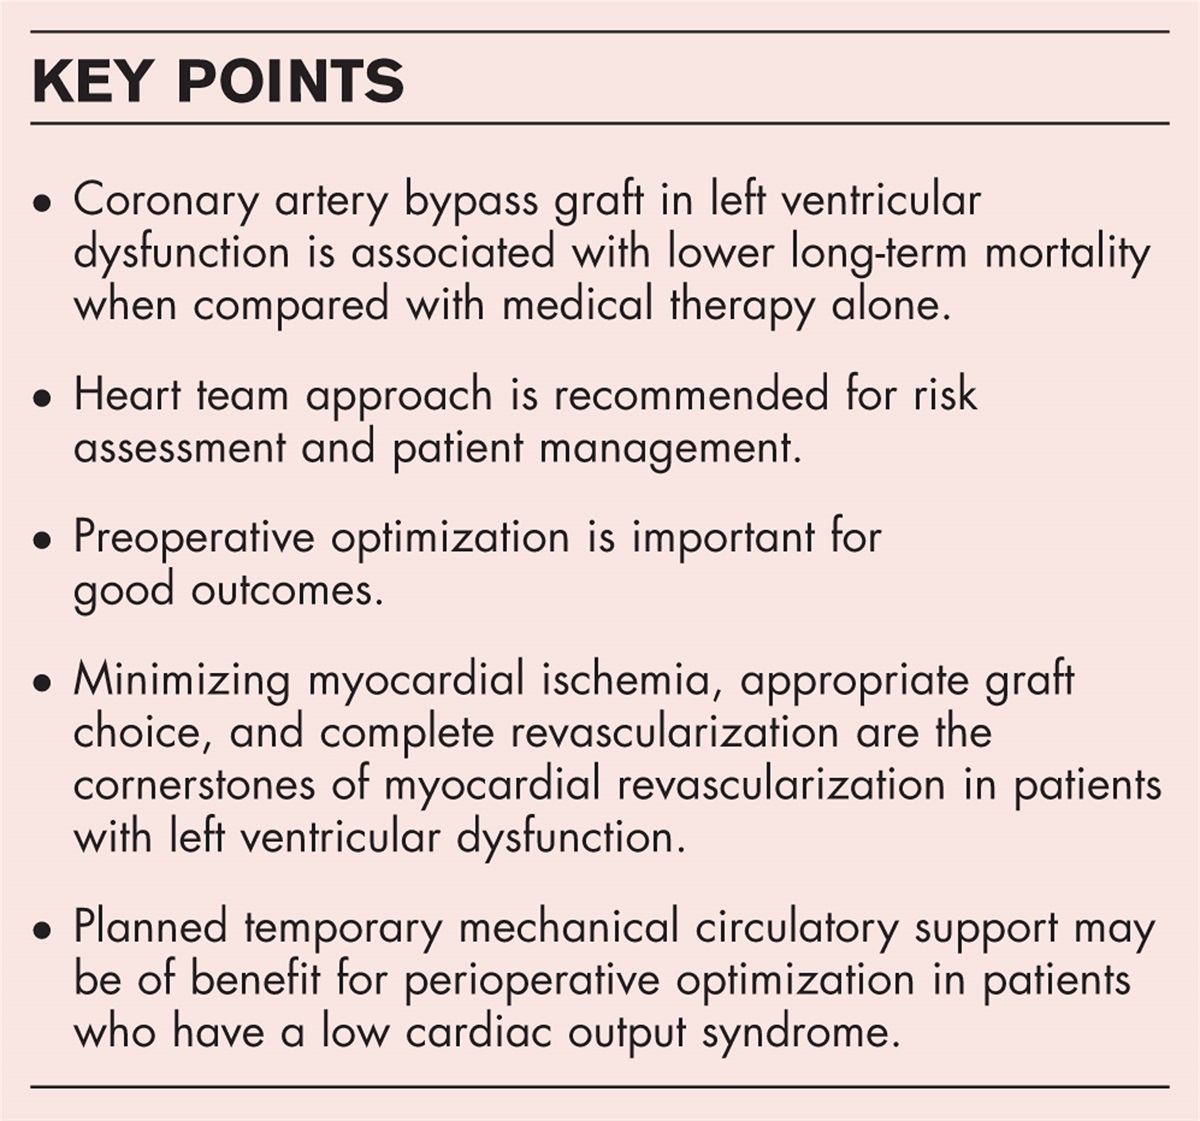 Coronary artery bypass grafting in left ventricular dysfunction: when and how